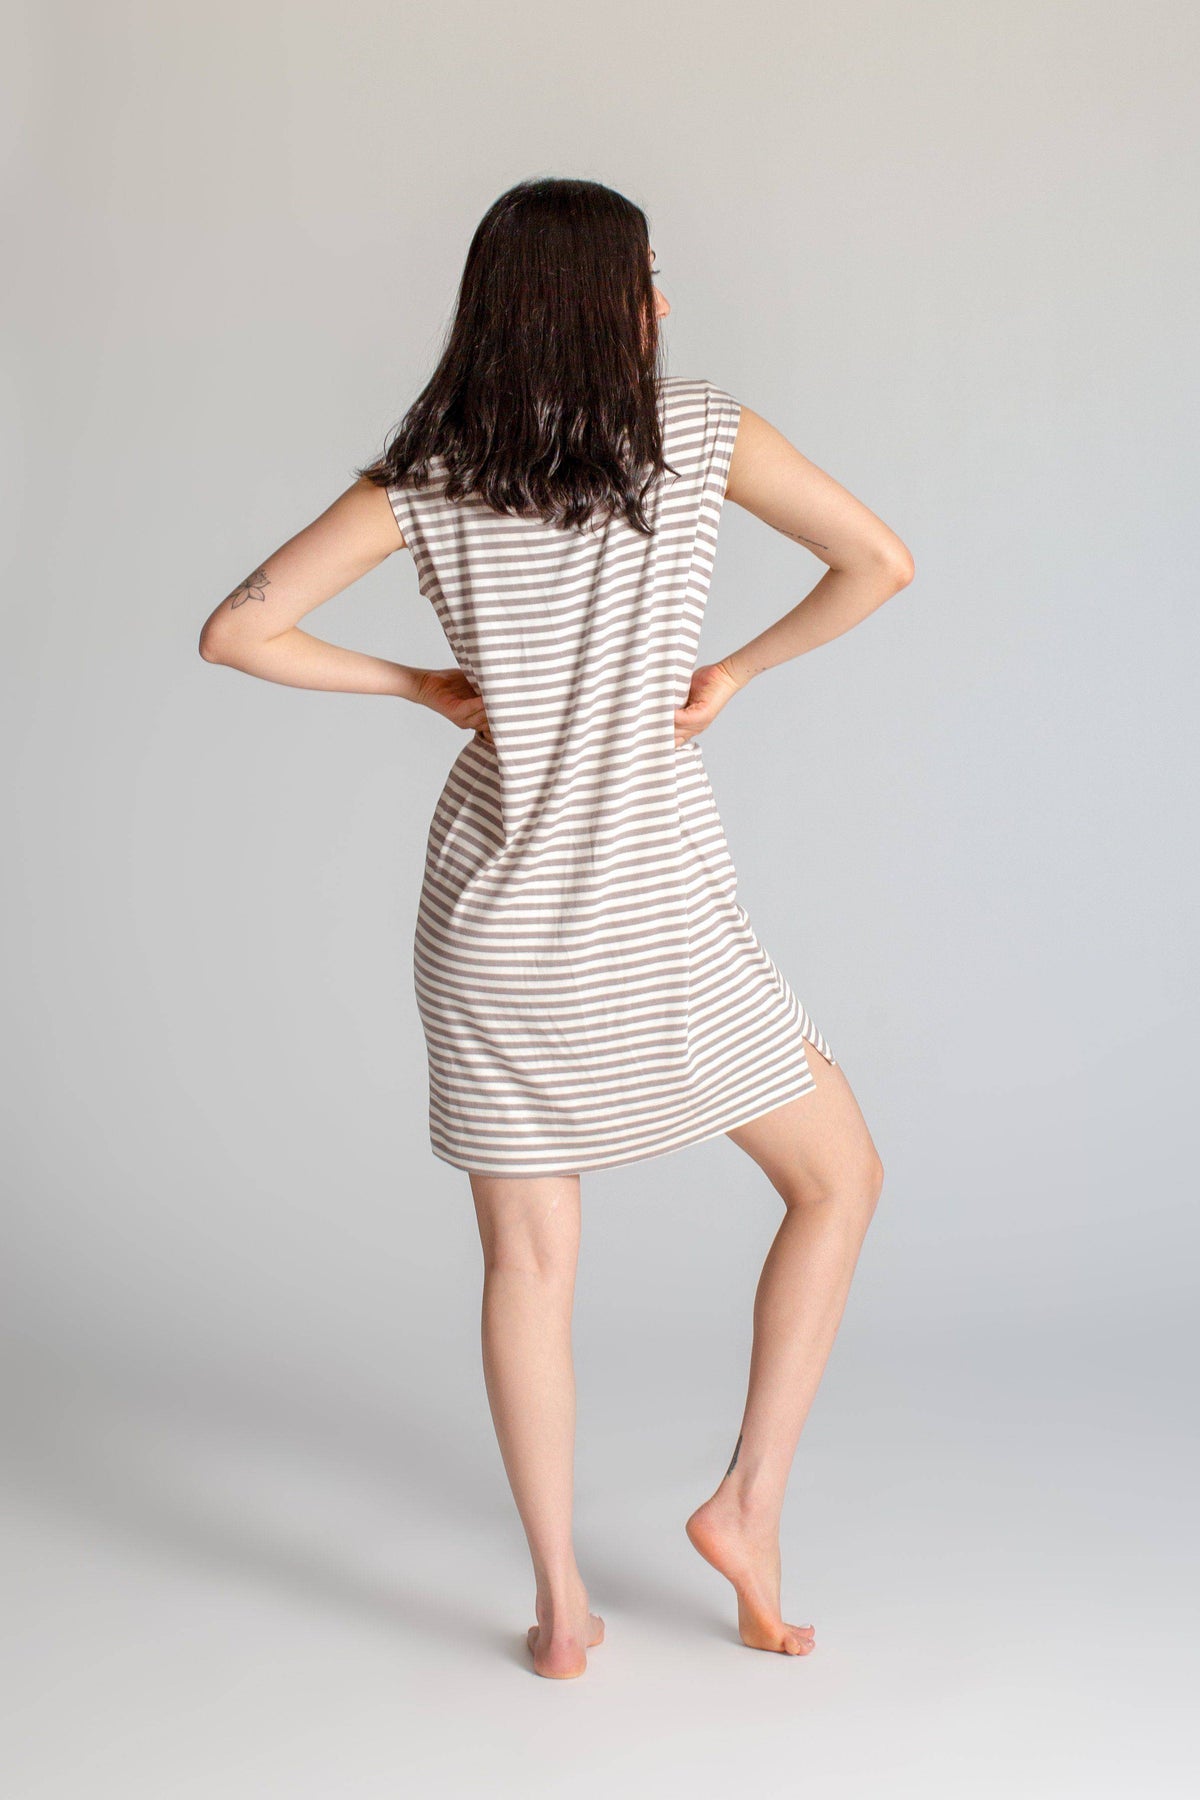 Limited Edition Striped Cup Sleeve Dress - womens clothing - Ripple Yoga Wear